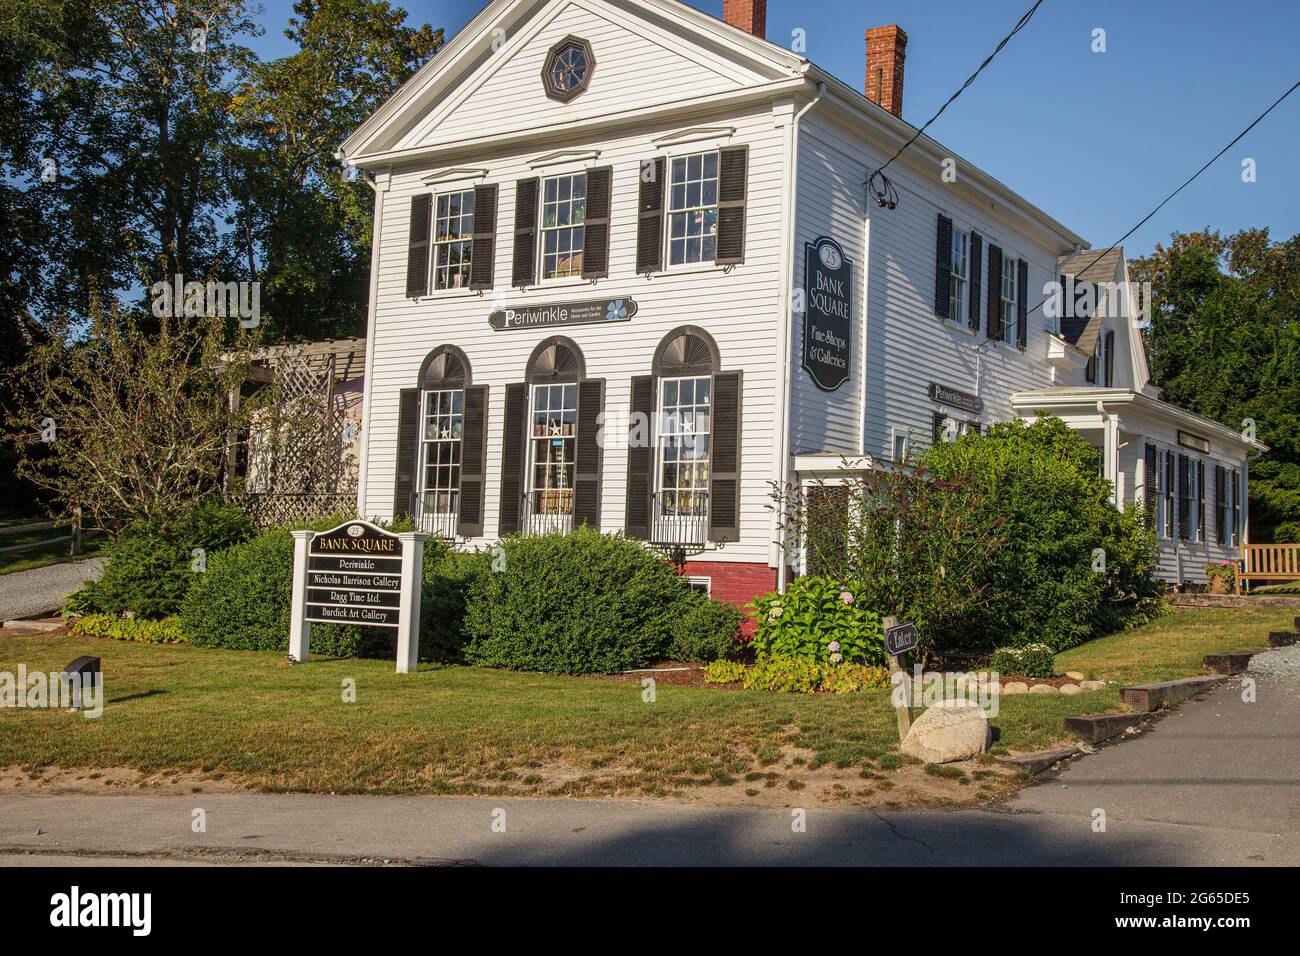 Bank Square fine Shops and Galleries situato a Wellfleet, Massachusetts Foto Stock